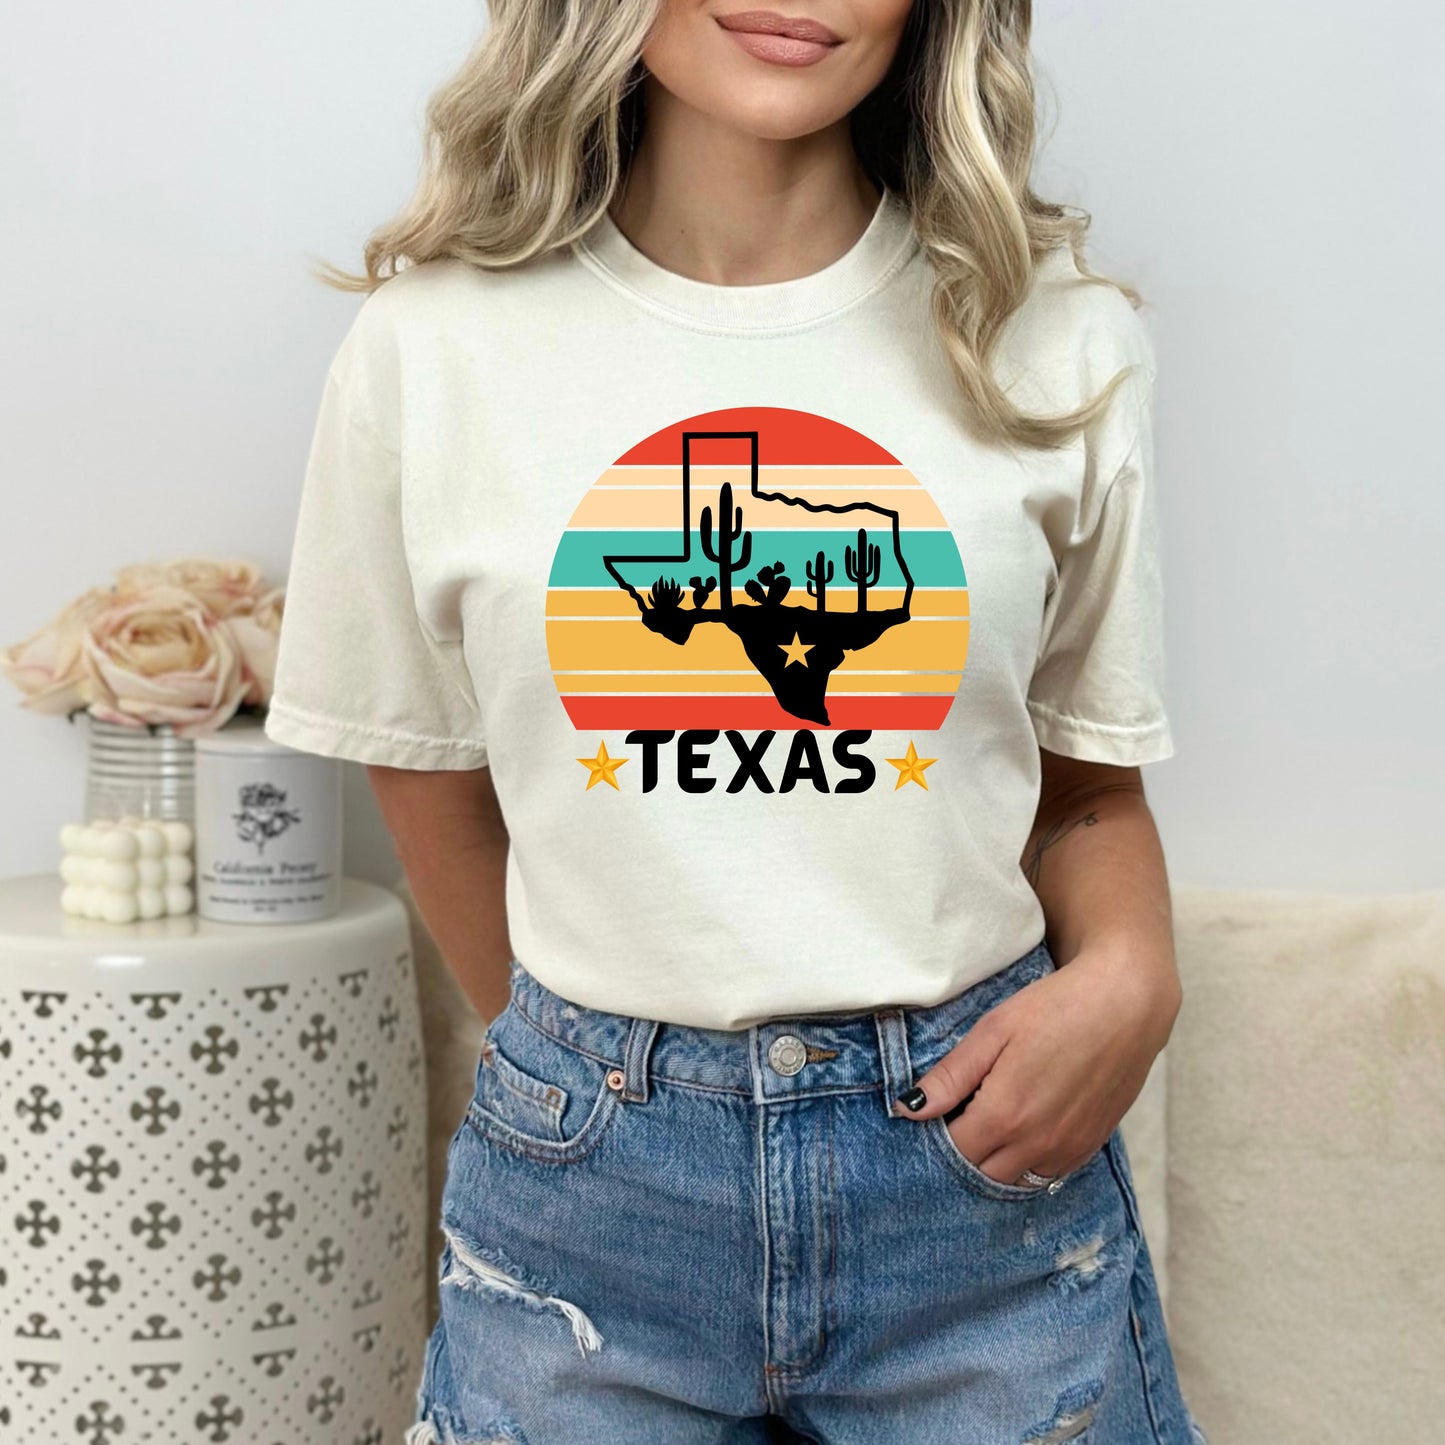 Texas Colorful T-Shirt, Texas Sunset T-Shirt For Women, Western T-Shirt, Texas Shirt, Texas Sunset Shirt, Gifts For Her, Gifts For Mom